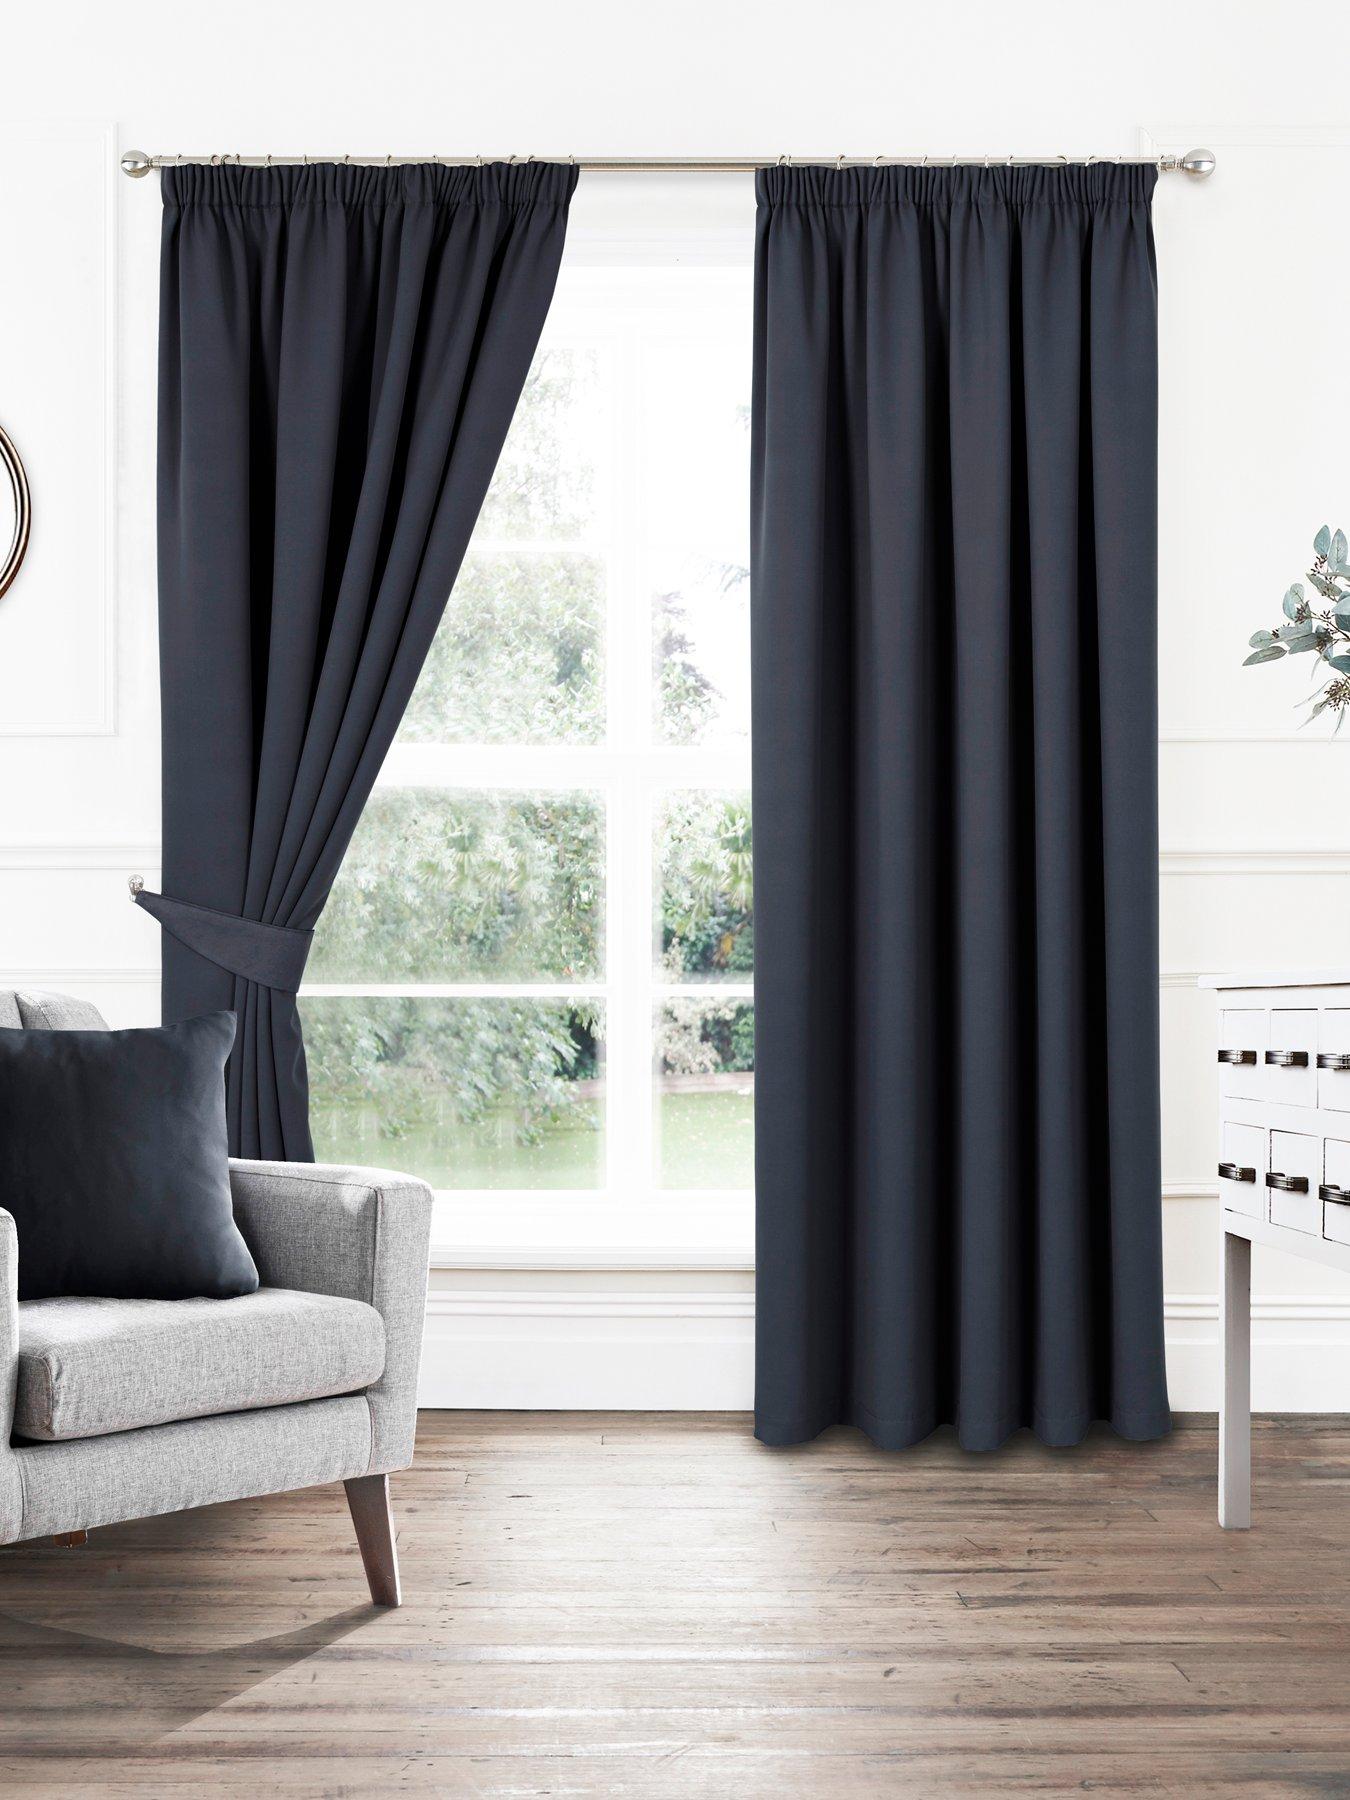 Add Style and Elegance to Your Home with Black Curtains